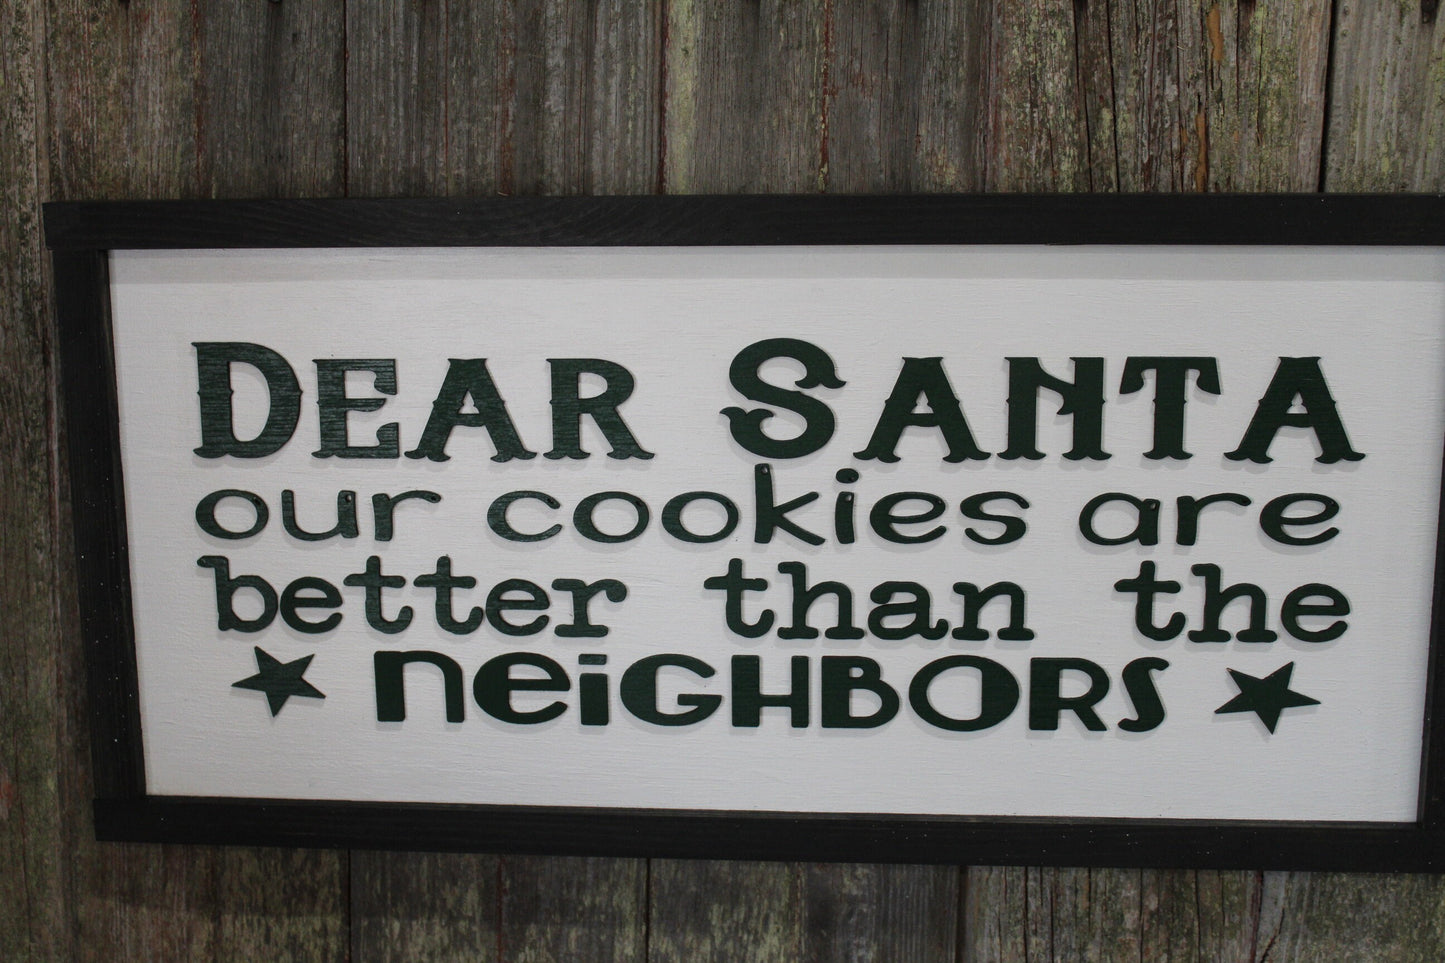 Dear Santa Cookies Funny Sign Our Cookies Are Better Than The Neighbors Raised Text Wood Sign Country Primitive Wall Decoration Christmas